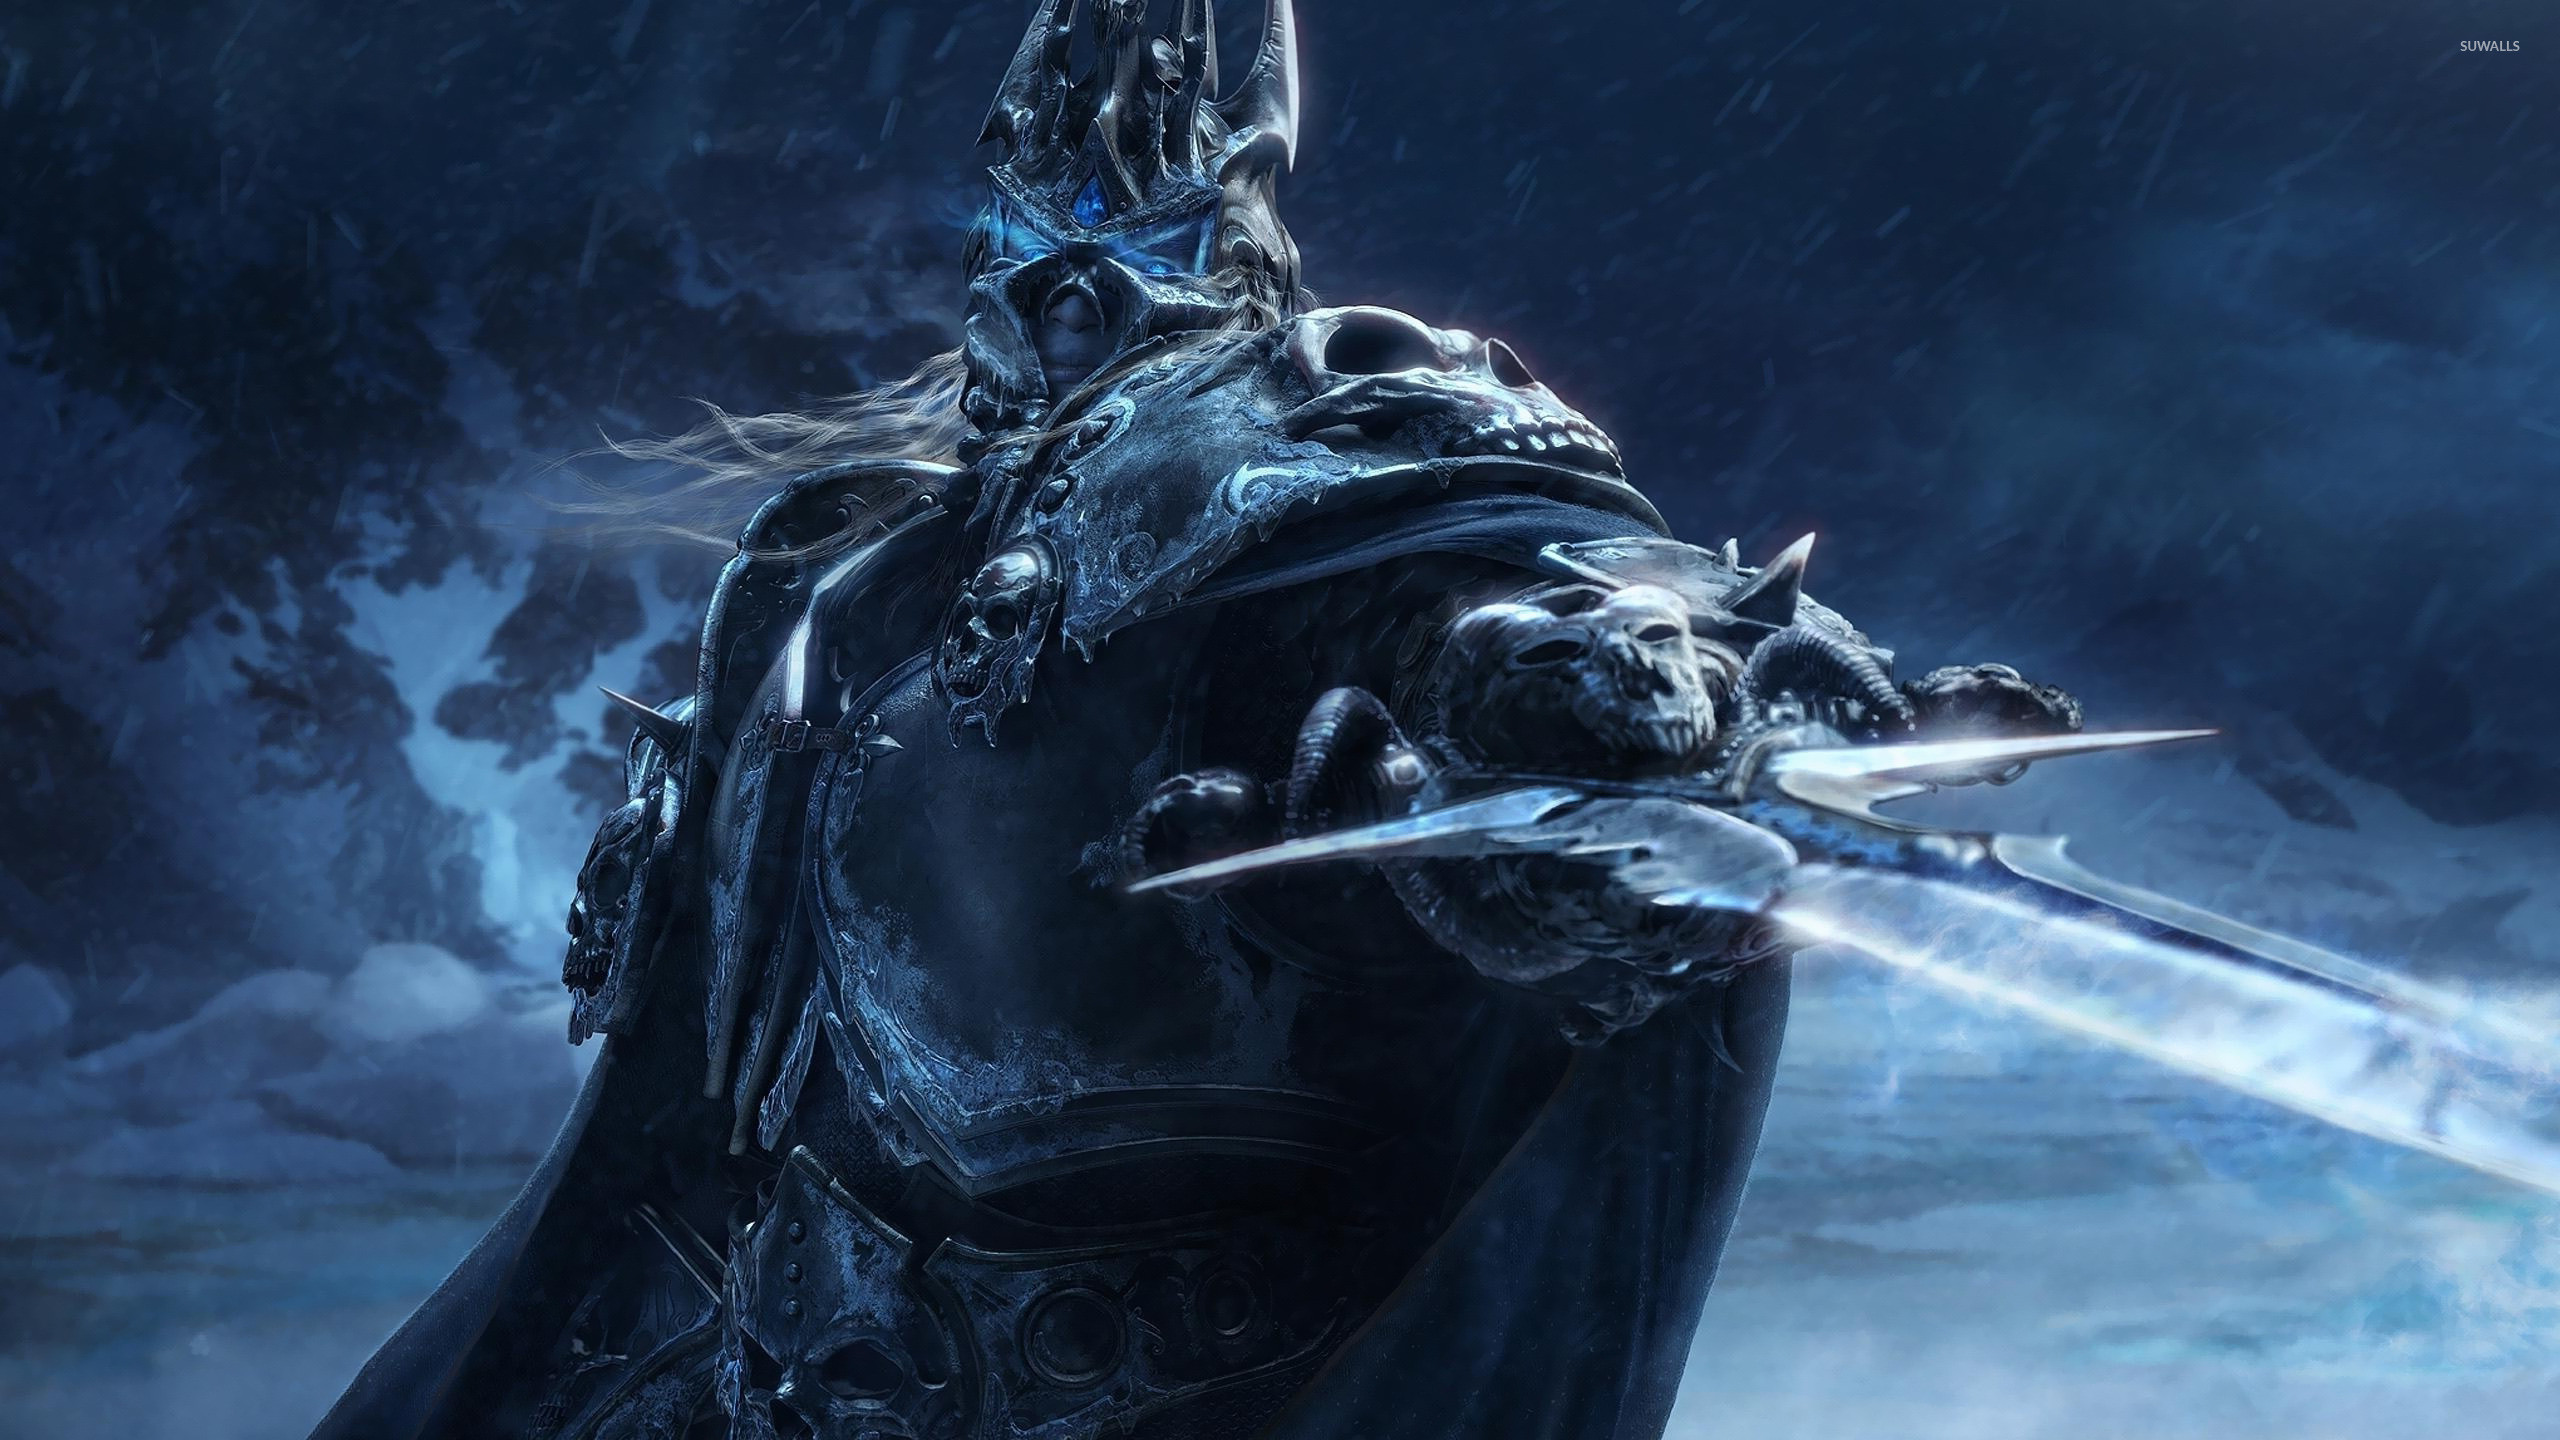 lich king animated wallpaper,cg artwork,action adventure game,digital compositing,games,pc game